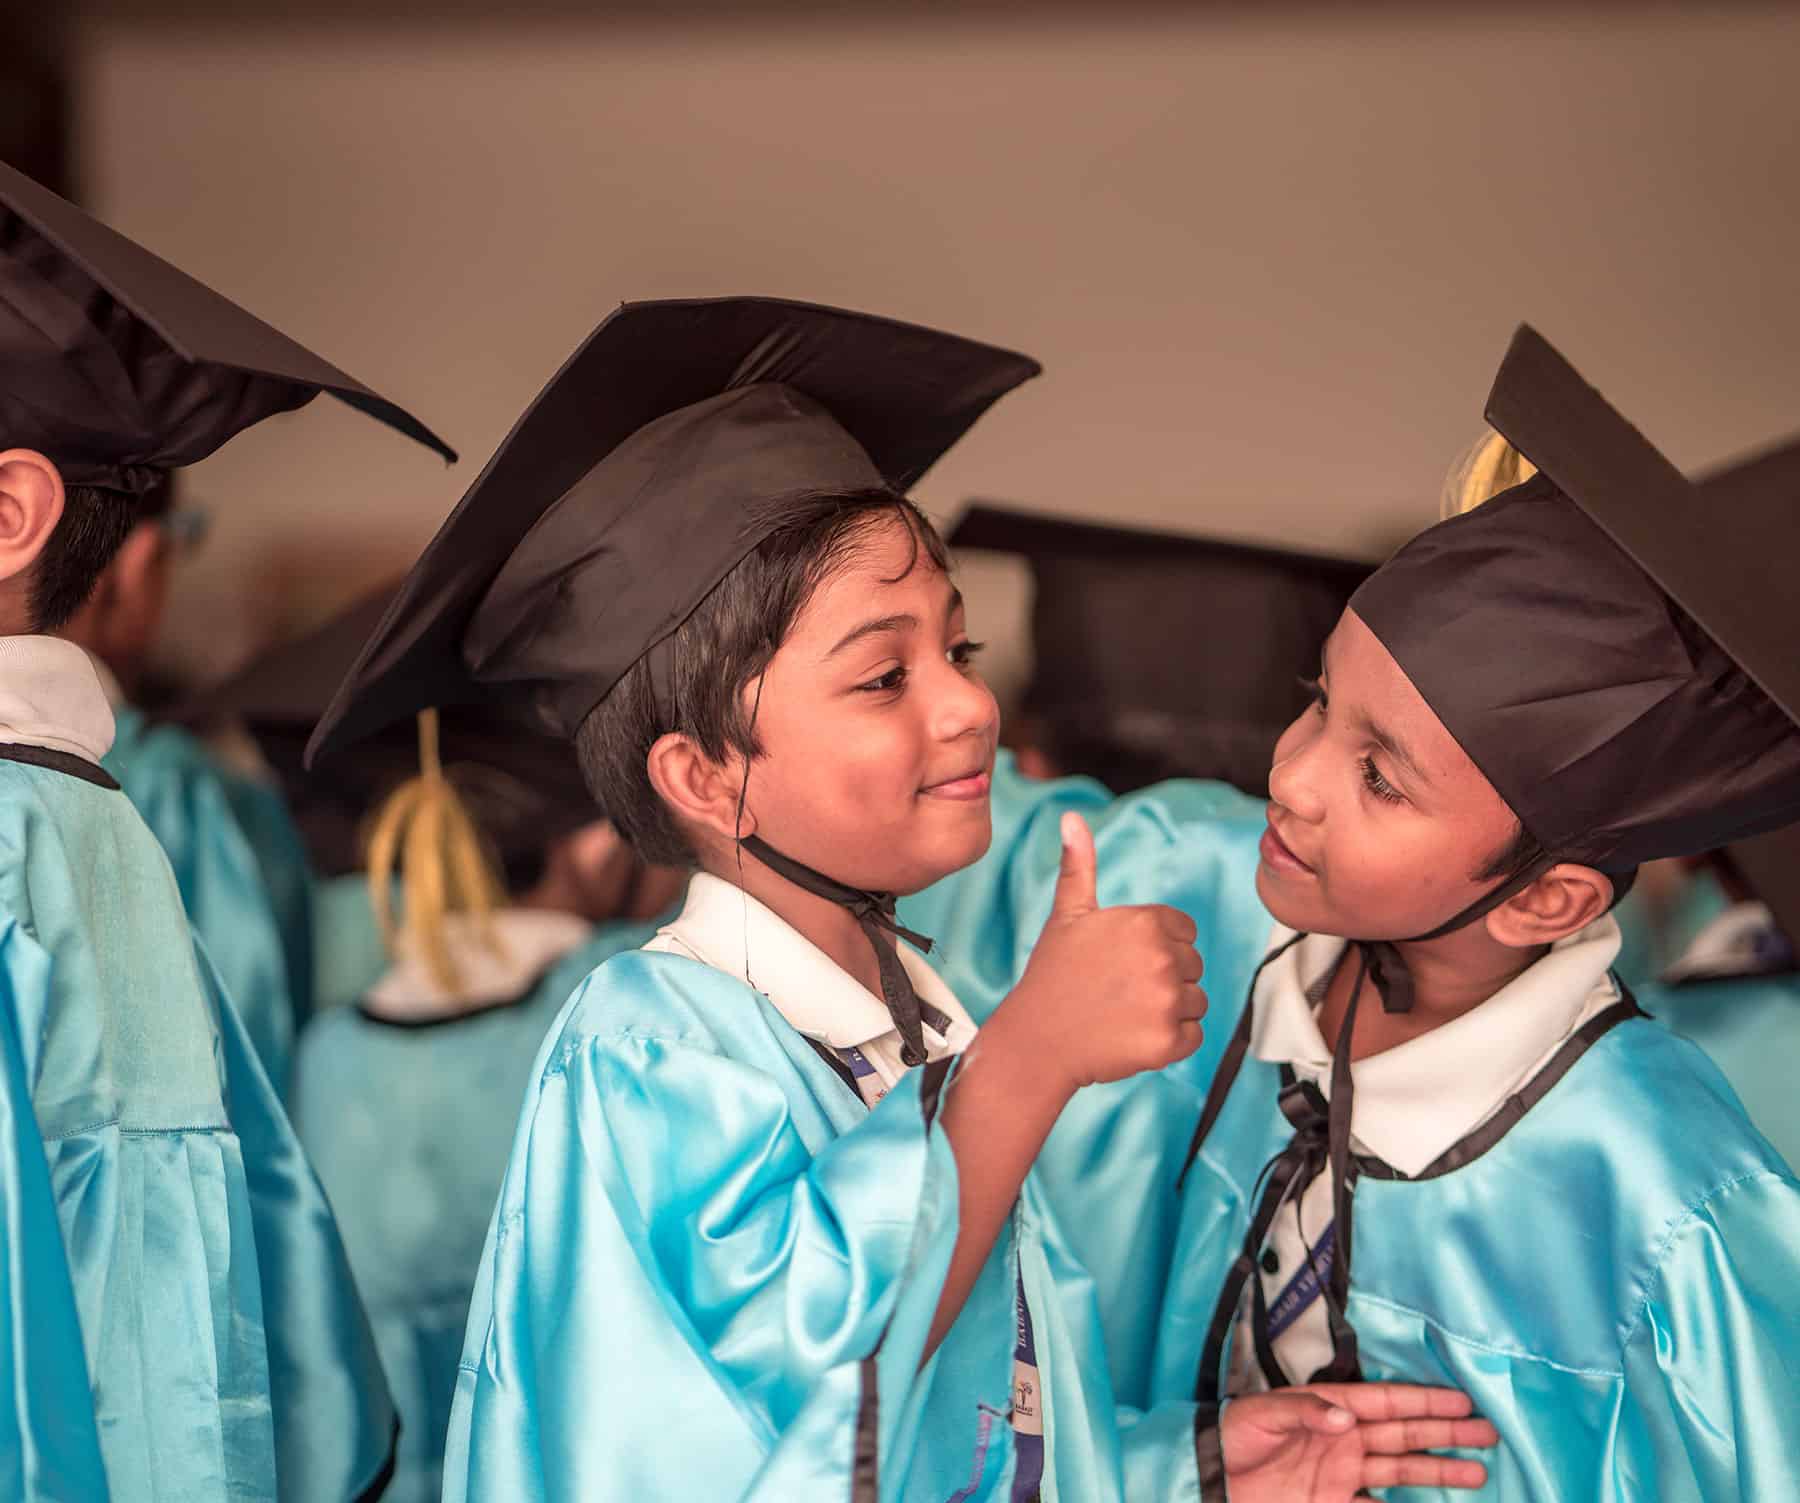 Happy Babaji Vidyashram School Children wearing graduation ceremon dress and mortarboard hat with one showing thumbs up as the other looks on.